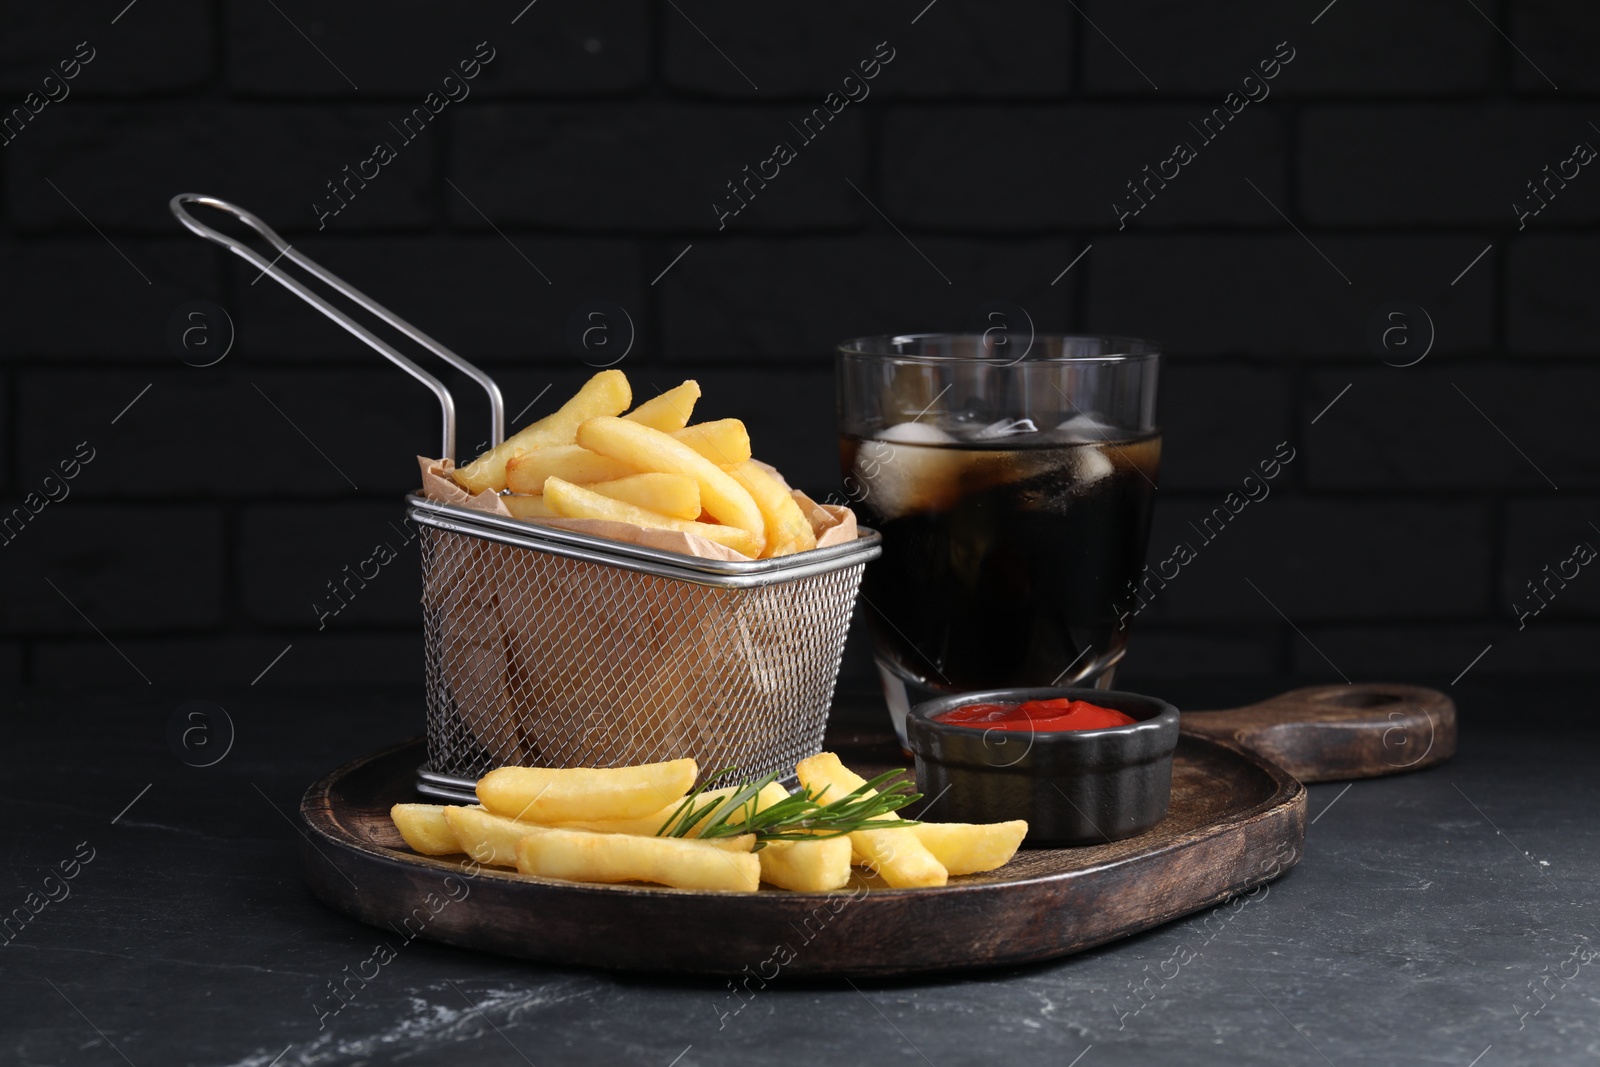 Photo of Tasty french fries, ketchup and soda drink on black table against brick wall